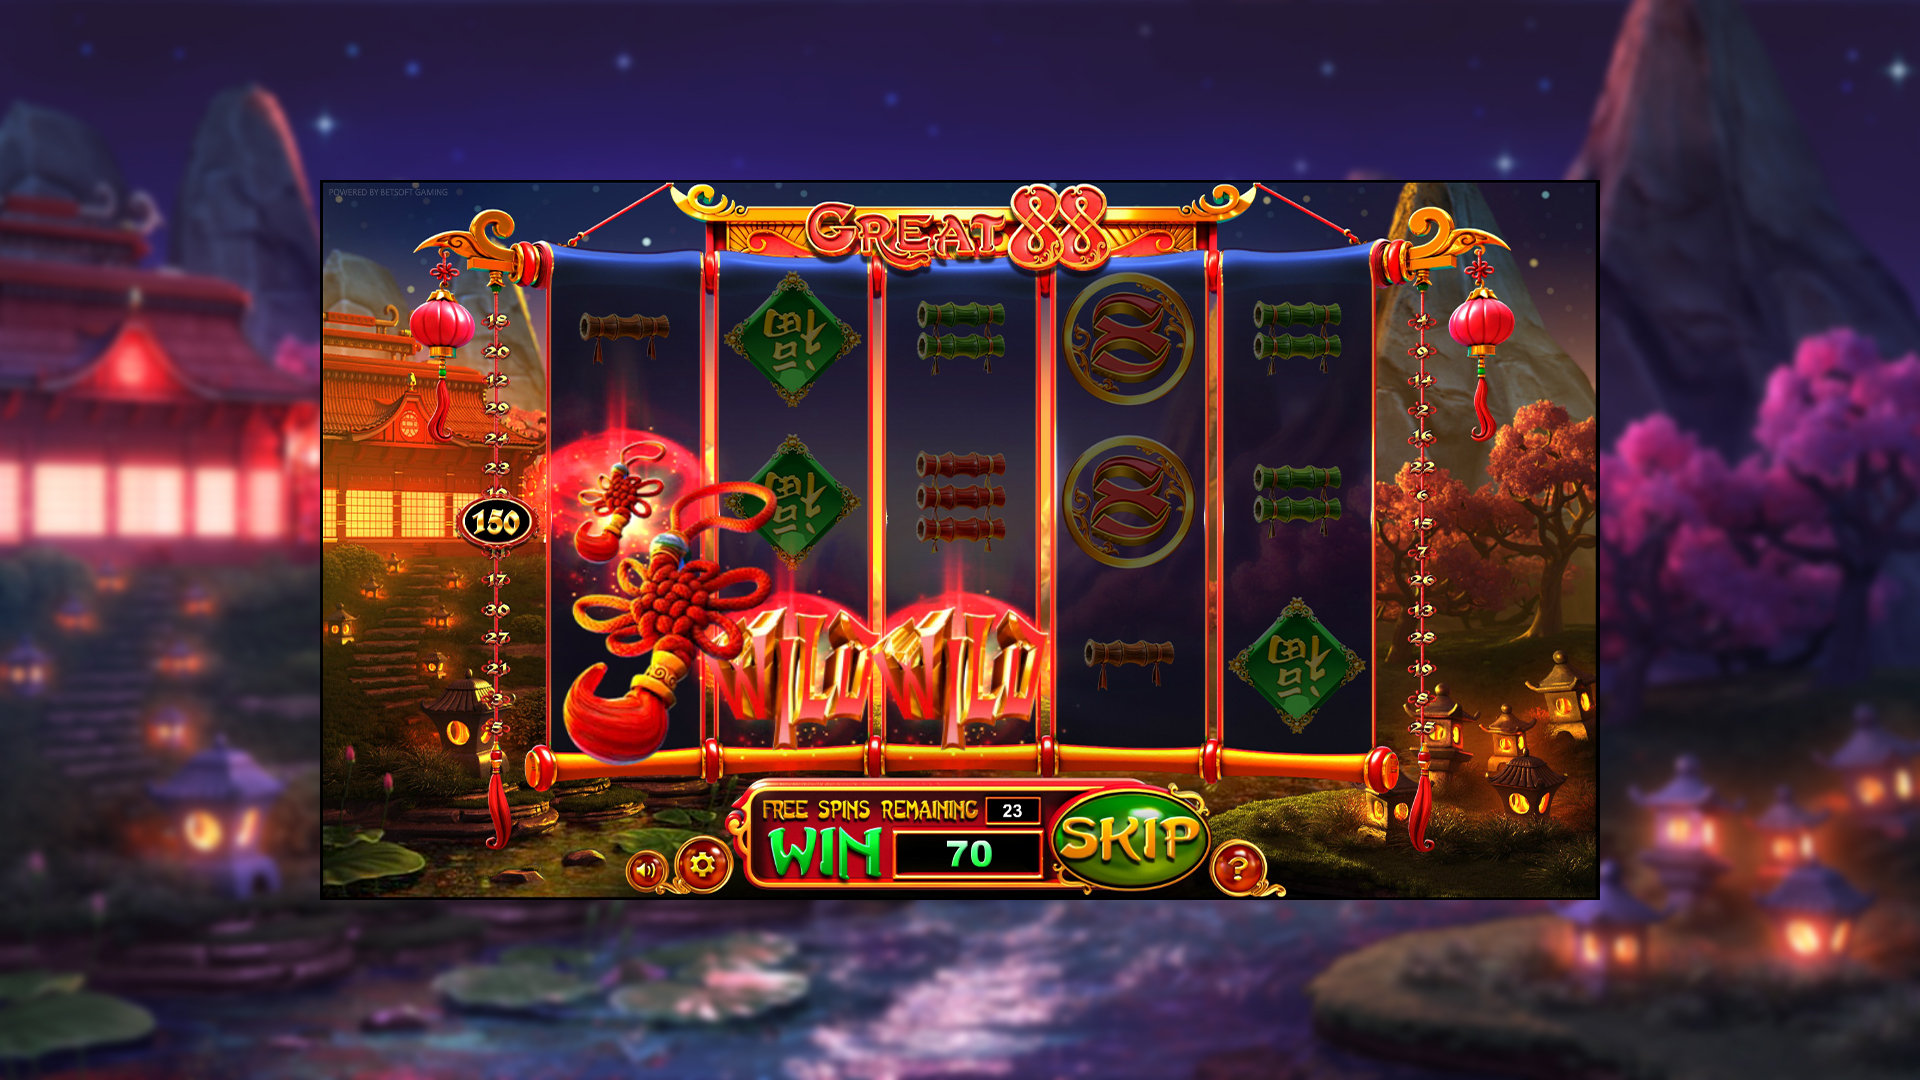 Great 88 - Free Spins